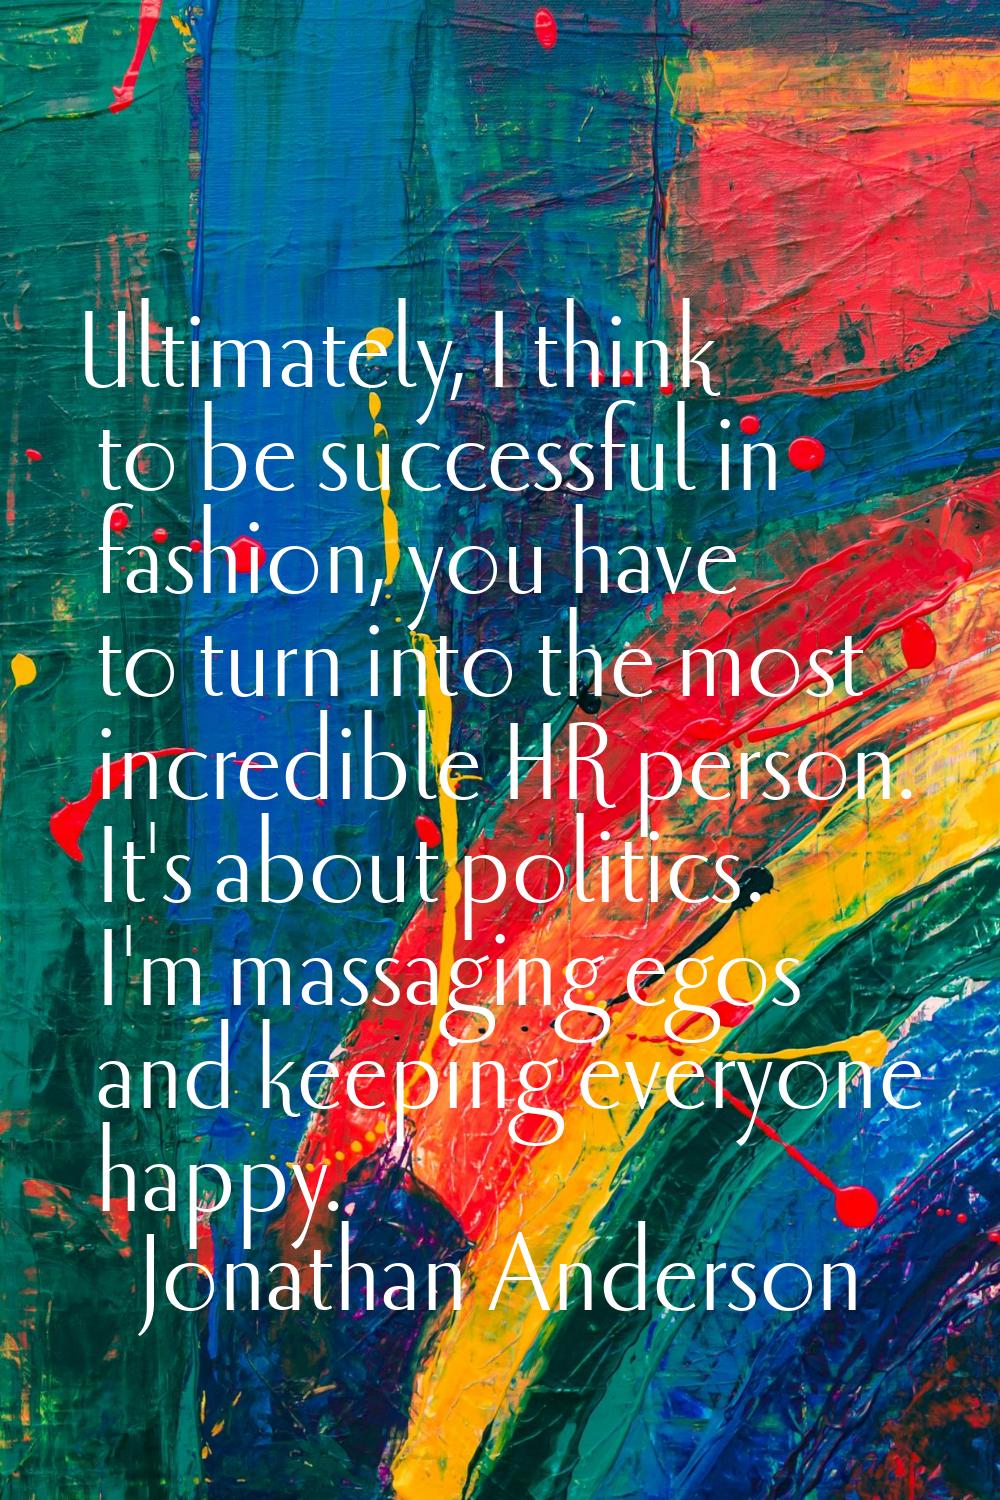 Ultimately, I think to be successful in fashion, you have to turn into the most incredible HR perso